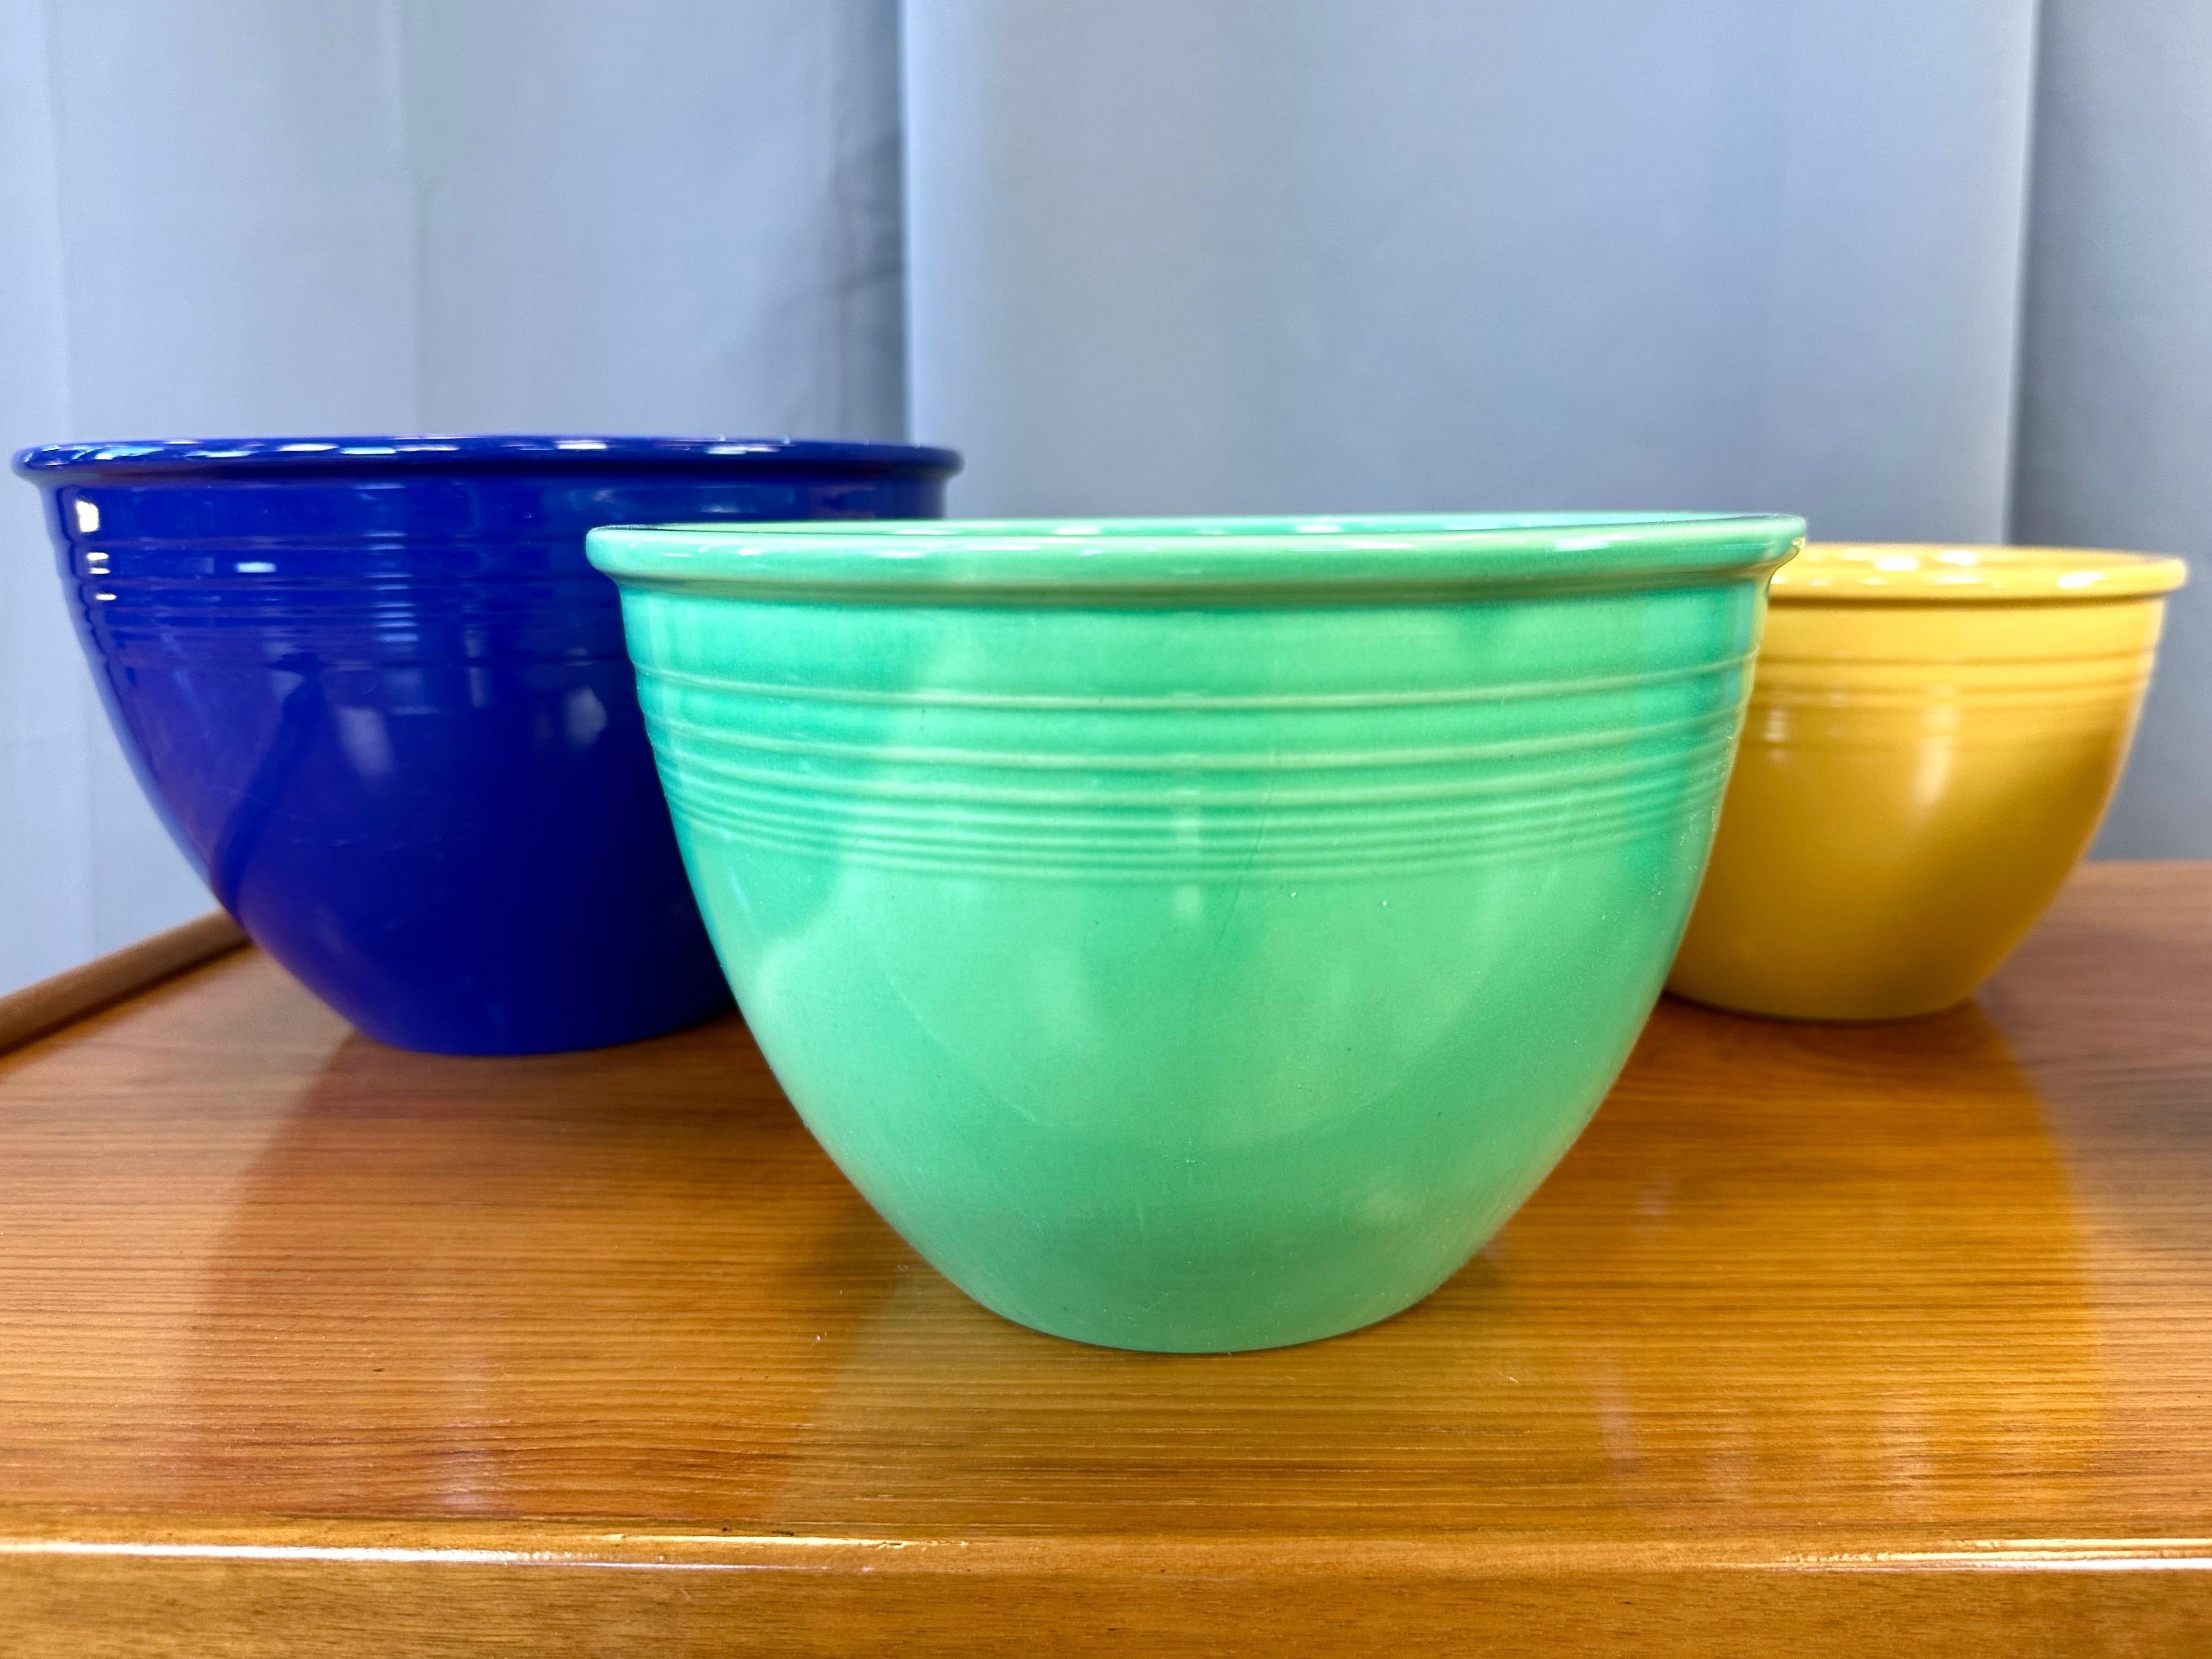 American Early Vintage Fiestaware Nesting Mixing Bowls, Multi-Color Set of Six, c. 1940